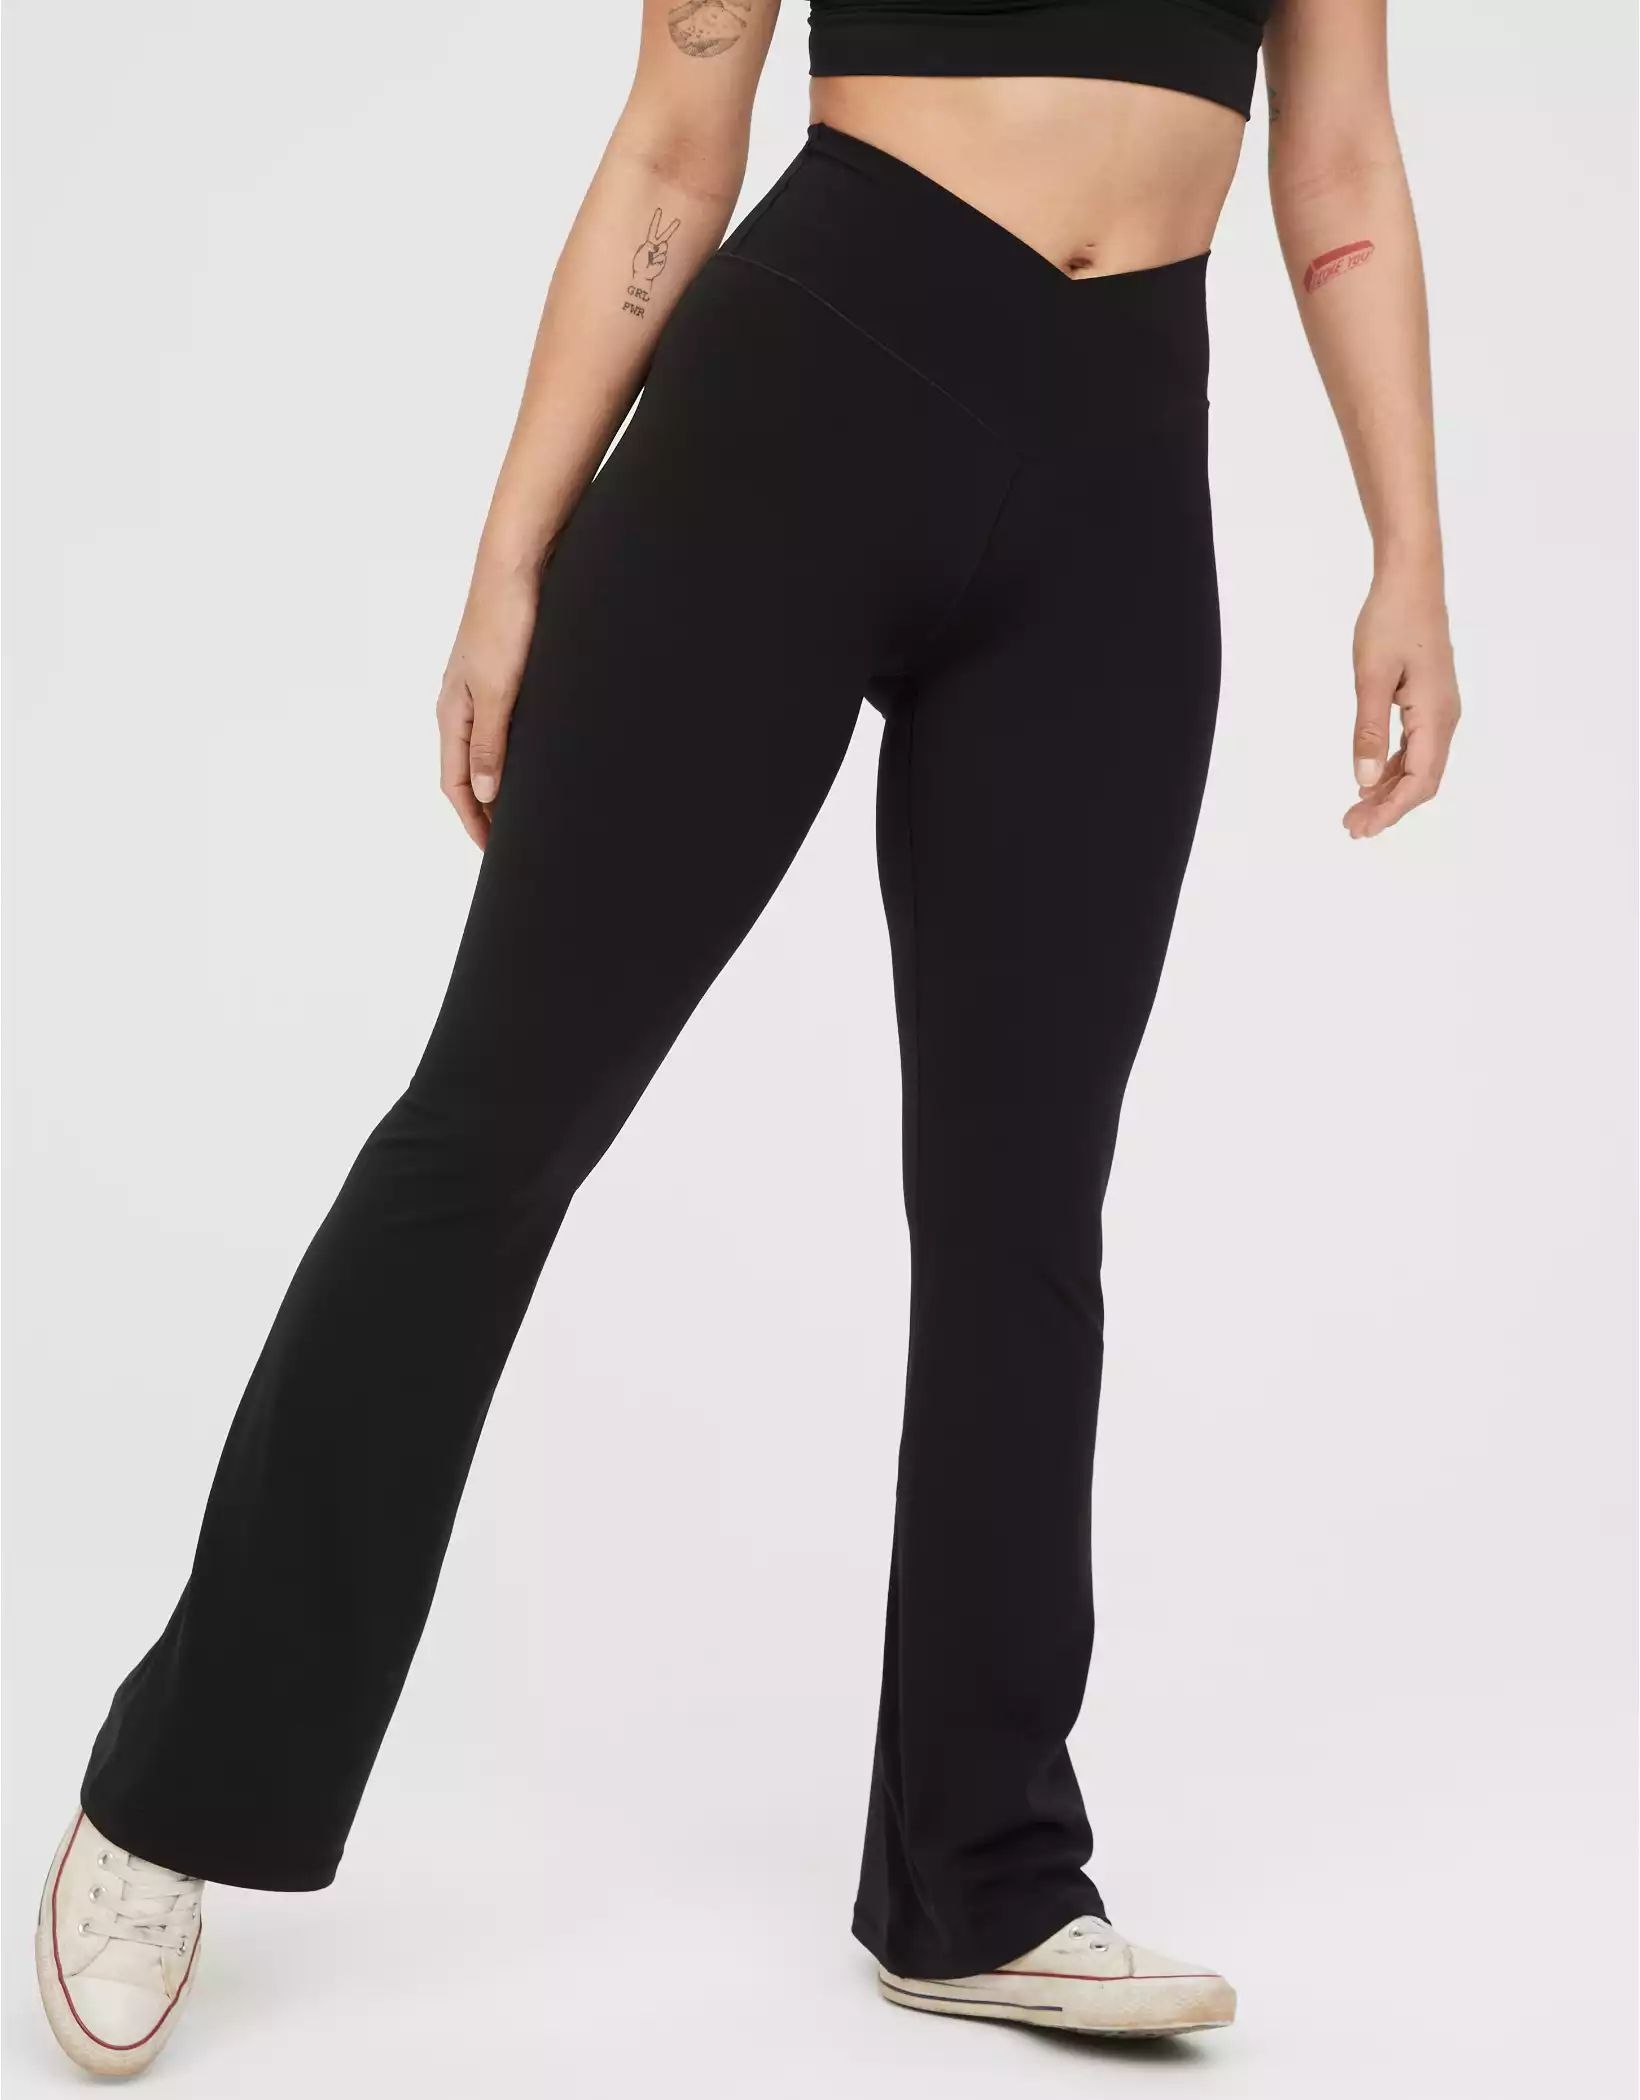 40% off all leggings & sweatshirts (including new arrivals!) | Aerie